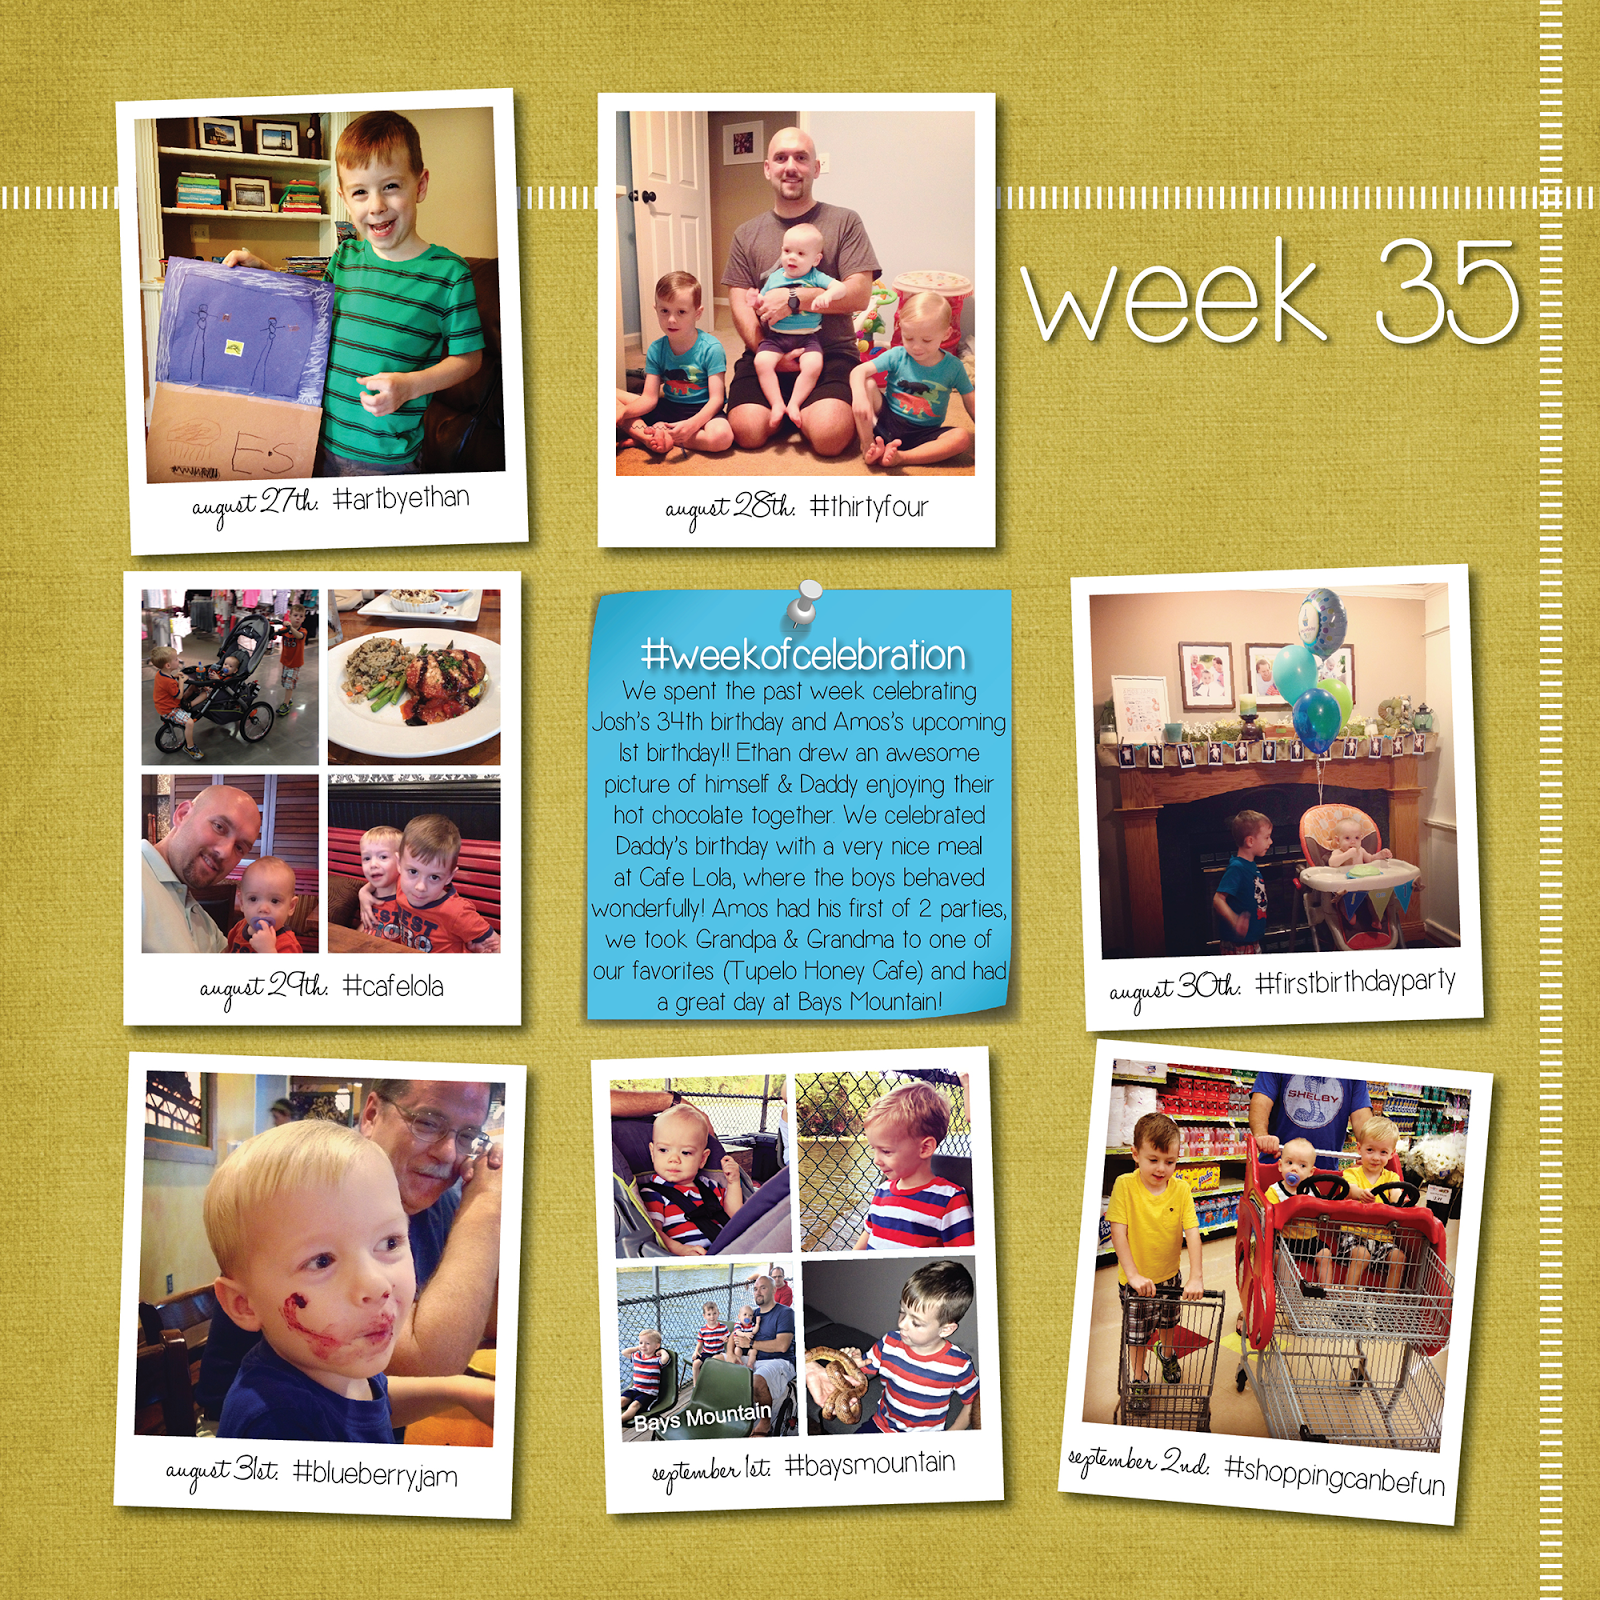 more than 9 to 5...my life as "Mom" The Wednesday One Week 35